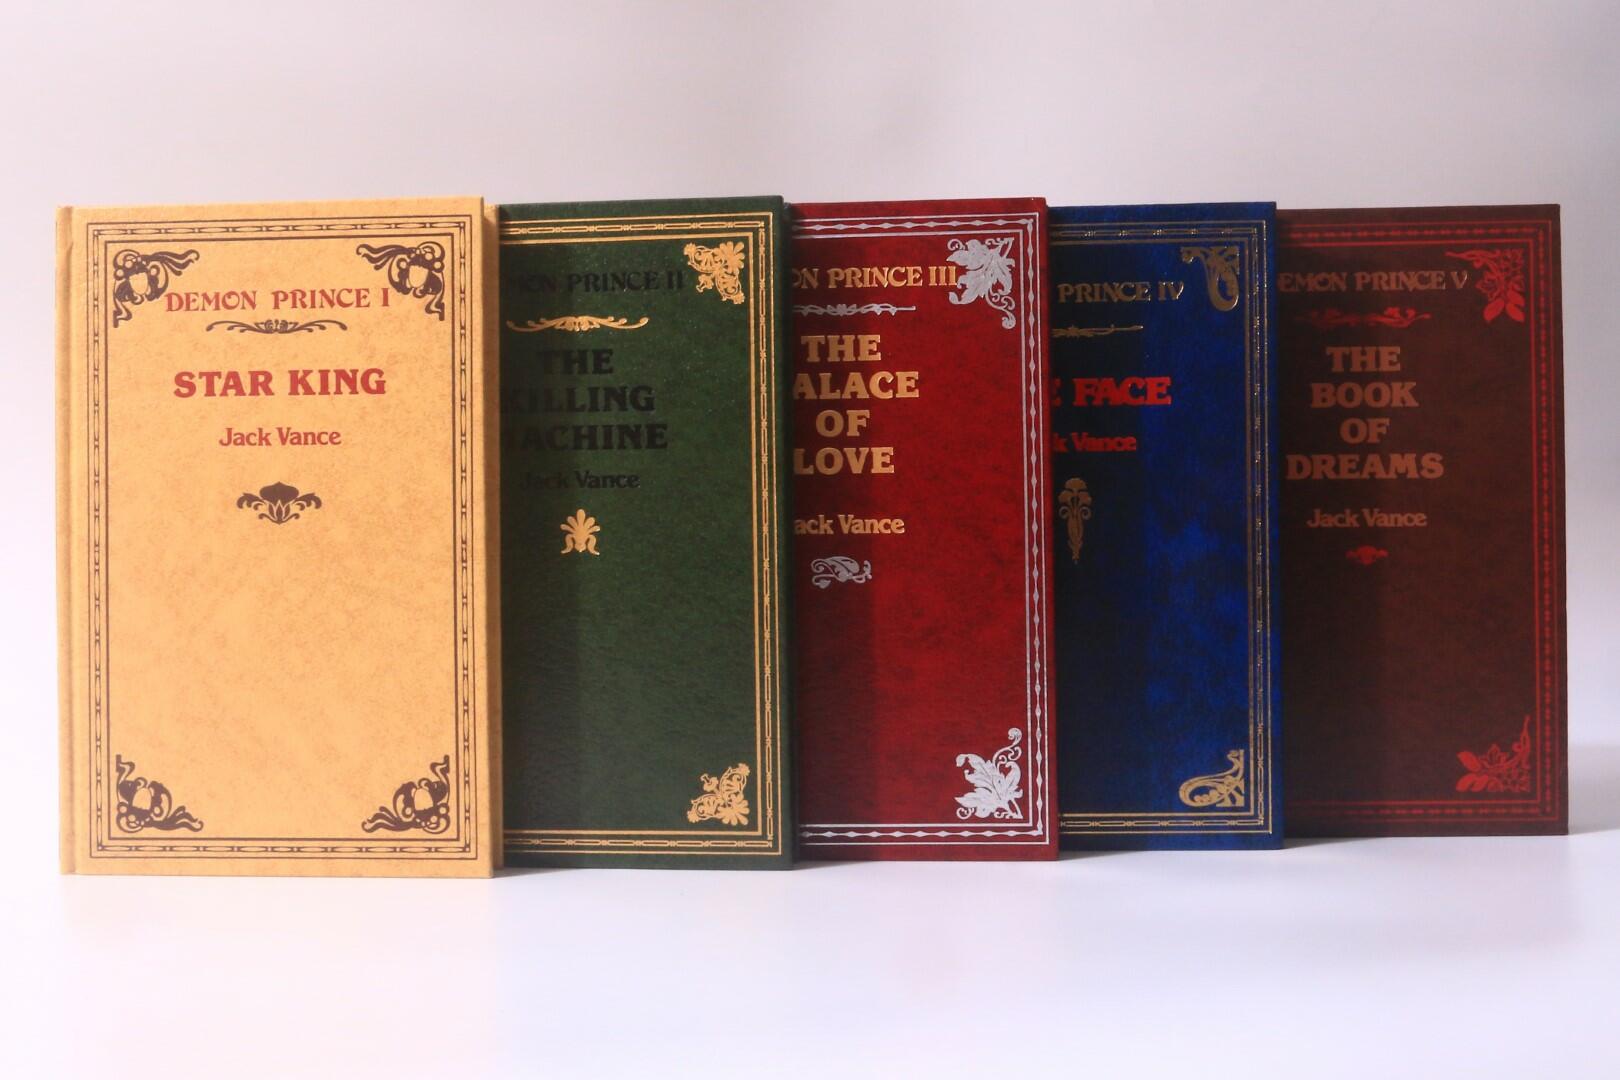 Jack Vance - The Demon Princes Series [comprising] Star King; The Killing Machine; The Palace of Love; The Face; and The Book of Dreams. - Underwood-Miller, 1981, Signed Limited Edition.